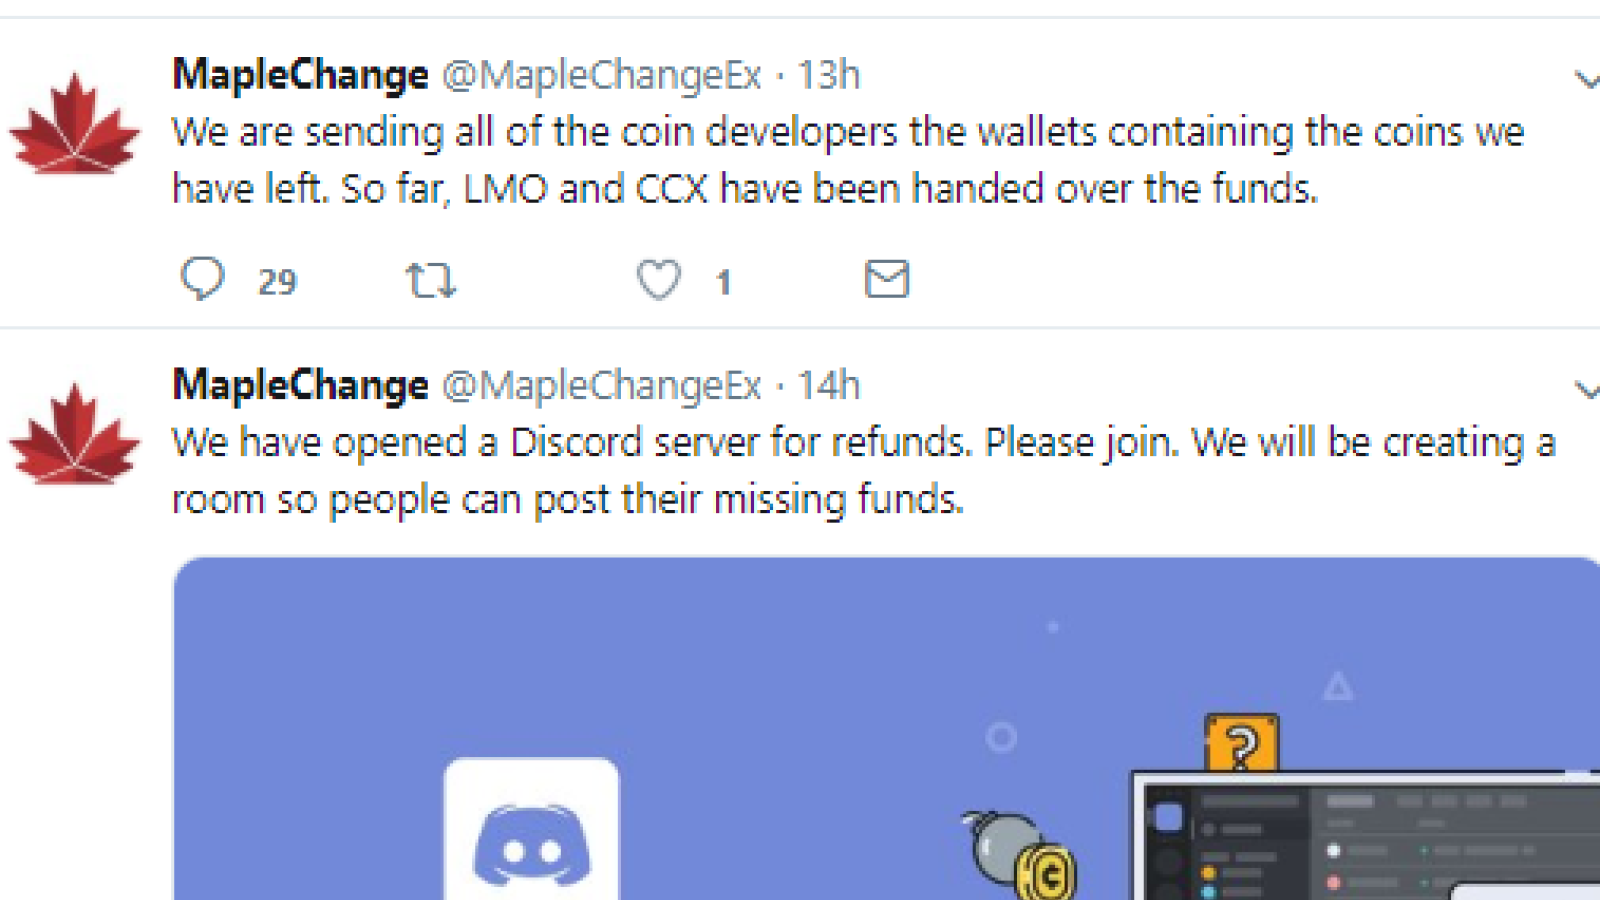 MapleChange tries to compensate